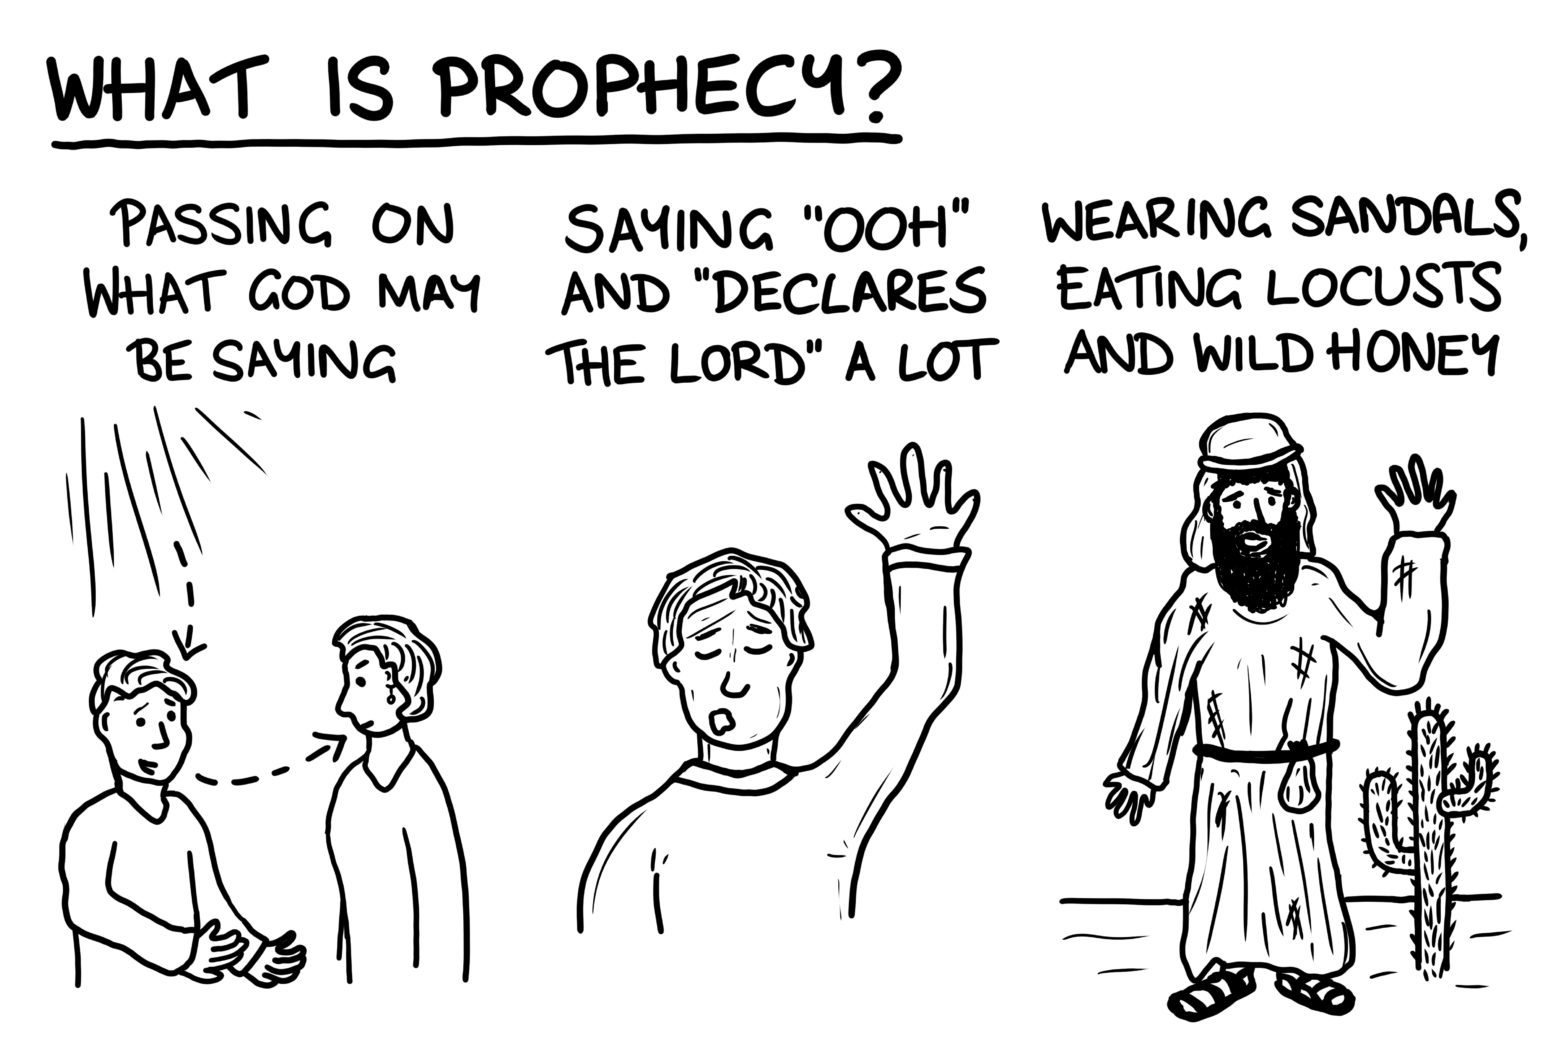 What is prophecy?